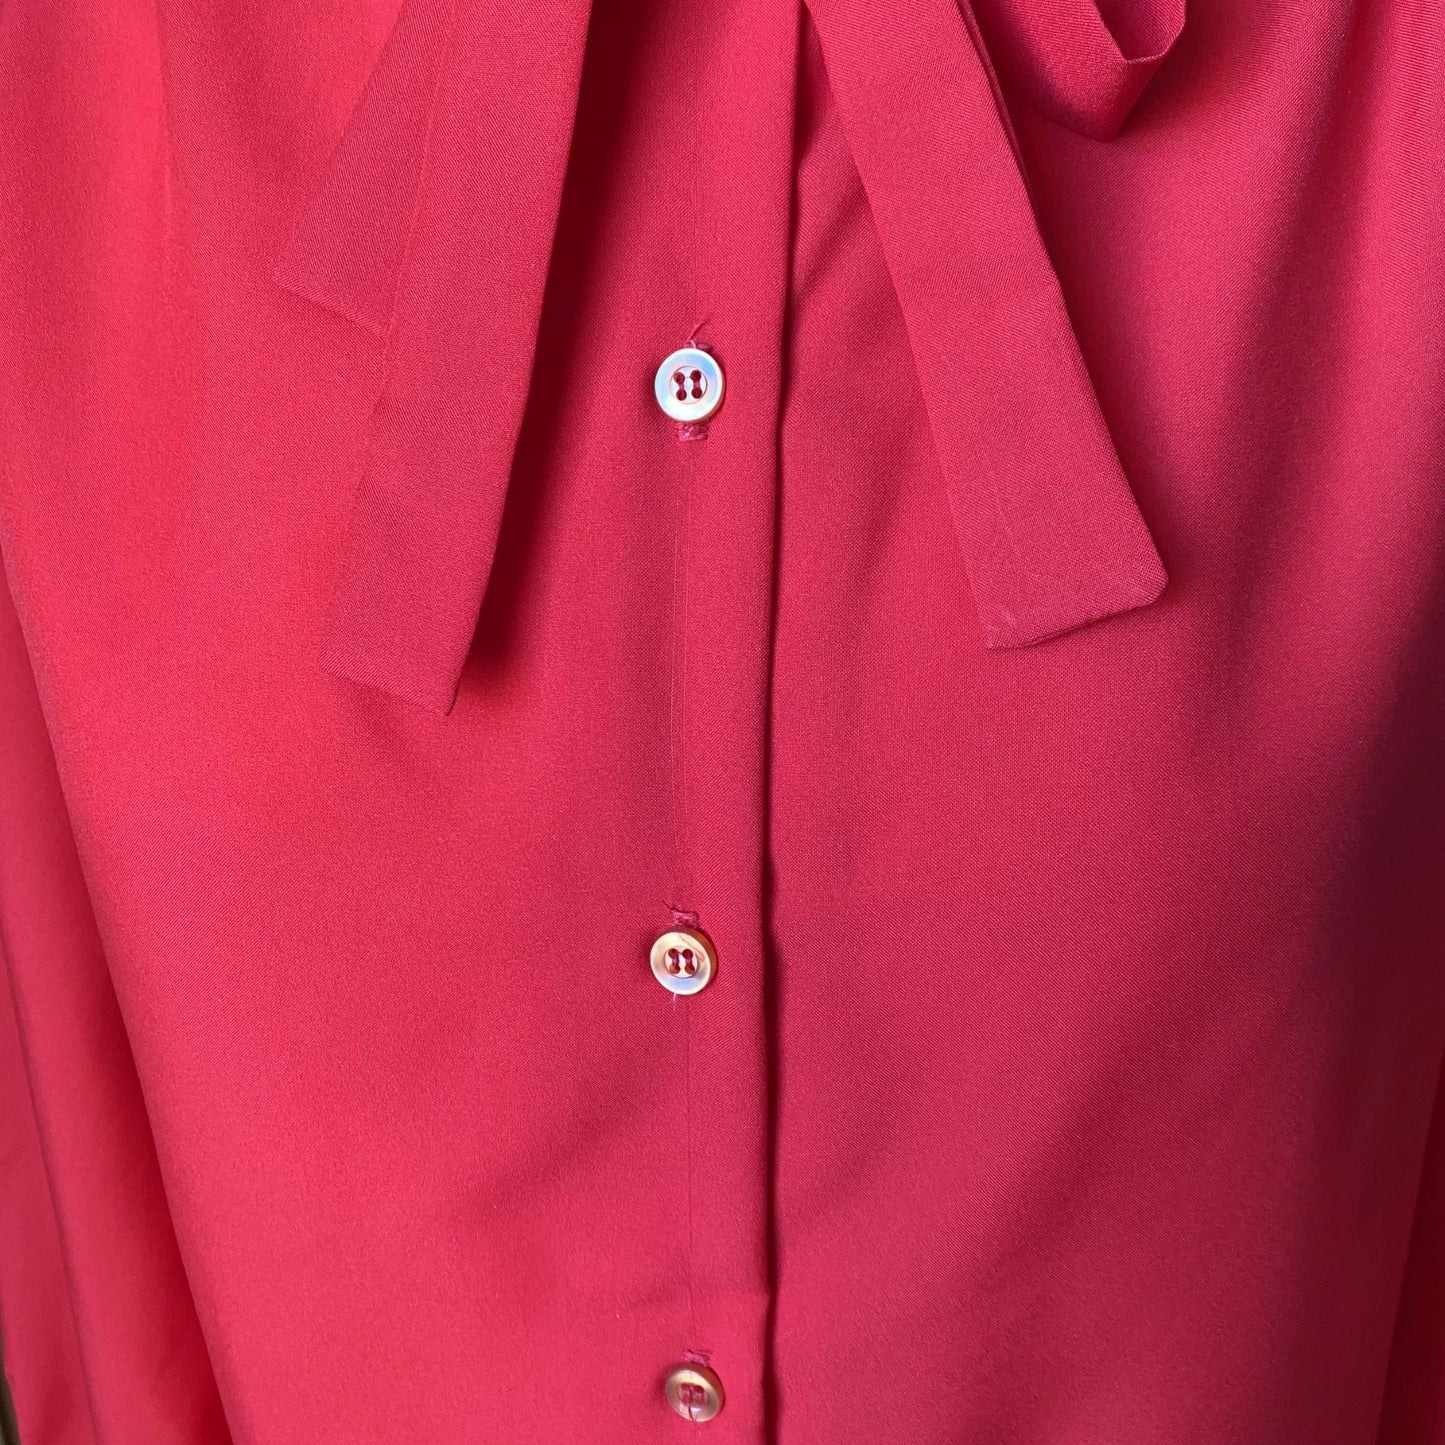 Red 80s secretary blouse with high frill collar and tie neck. Approx UK size 10-12